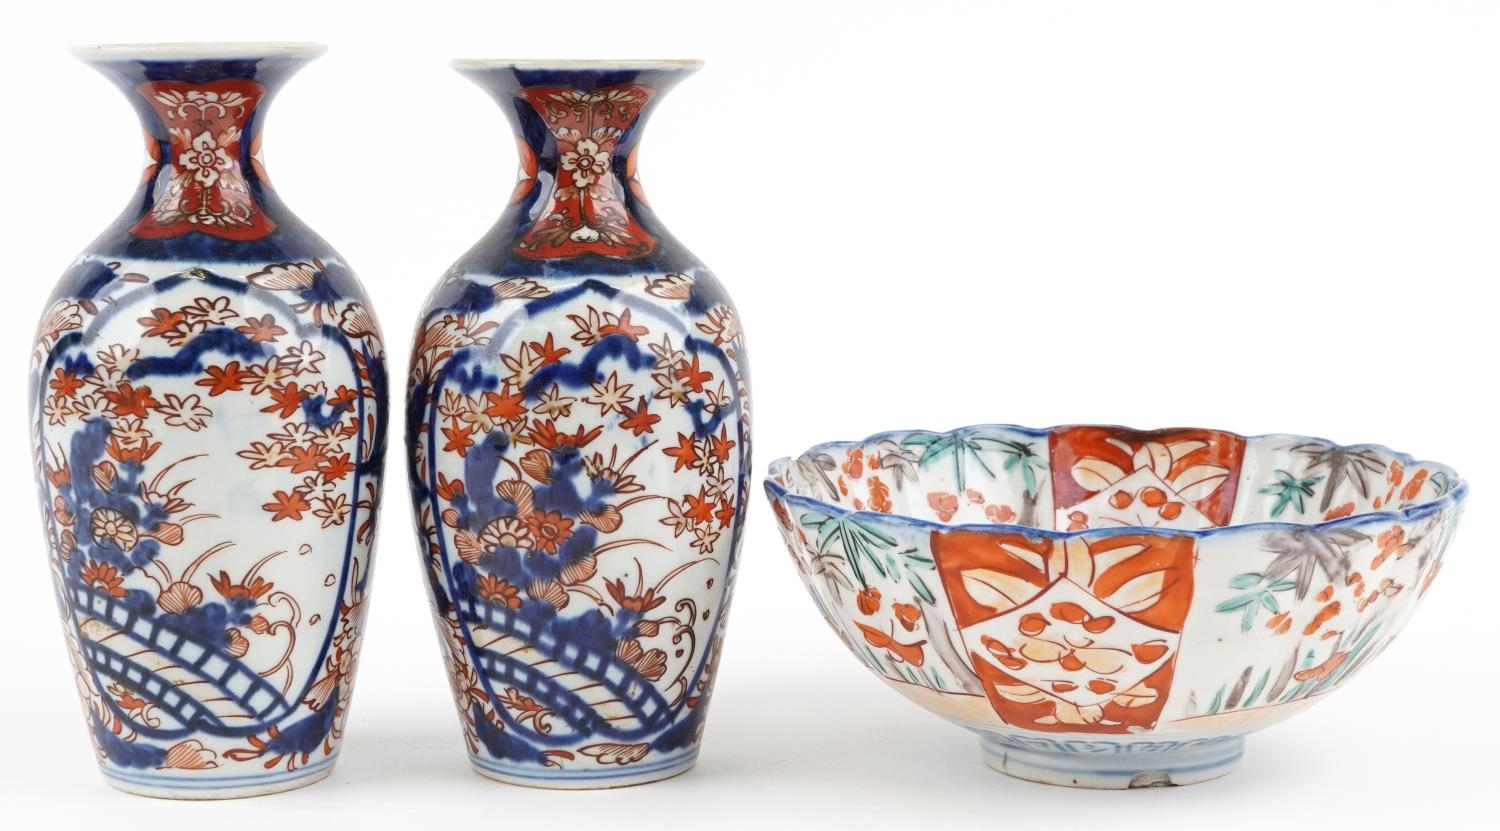 Japanese Imari porcelain including a pair of vases hand painted with flowers, the largest 19cm high - Image 5 of 9